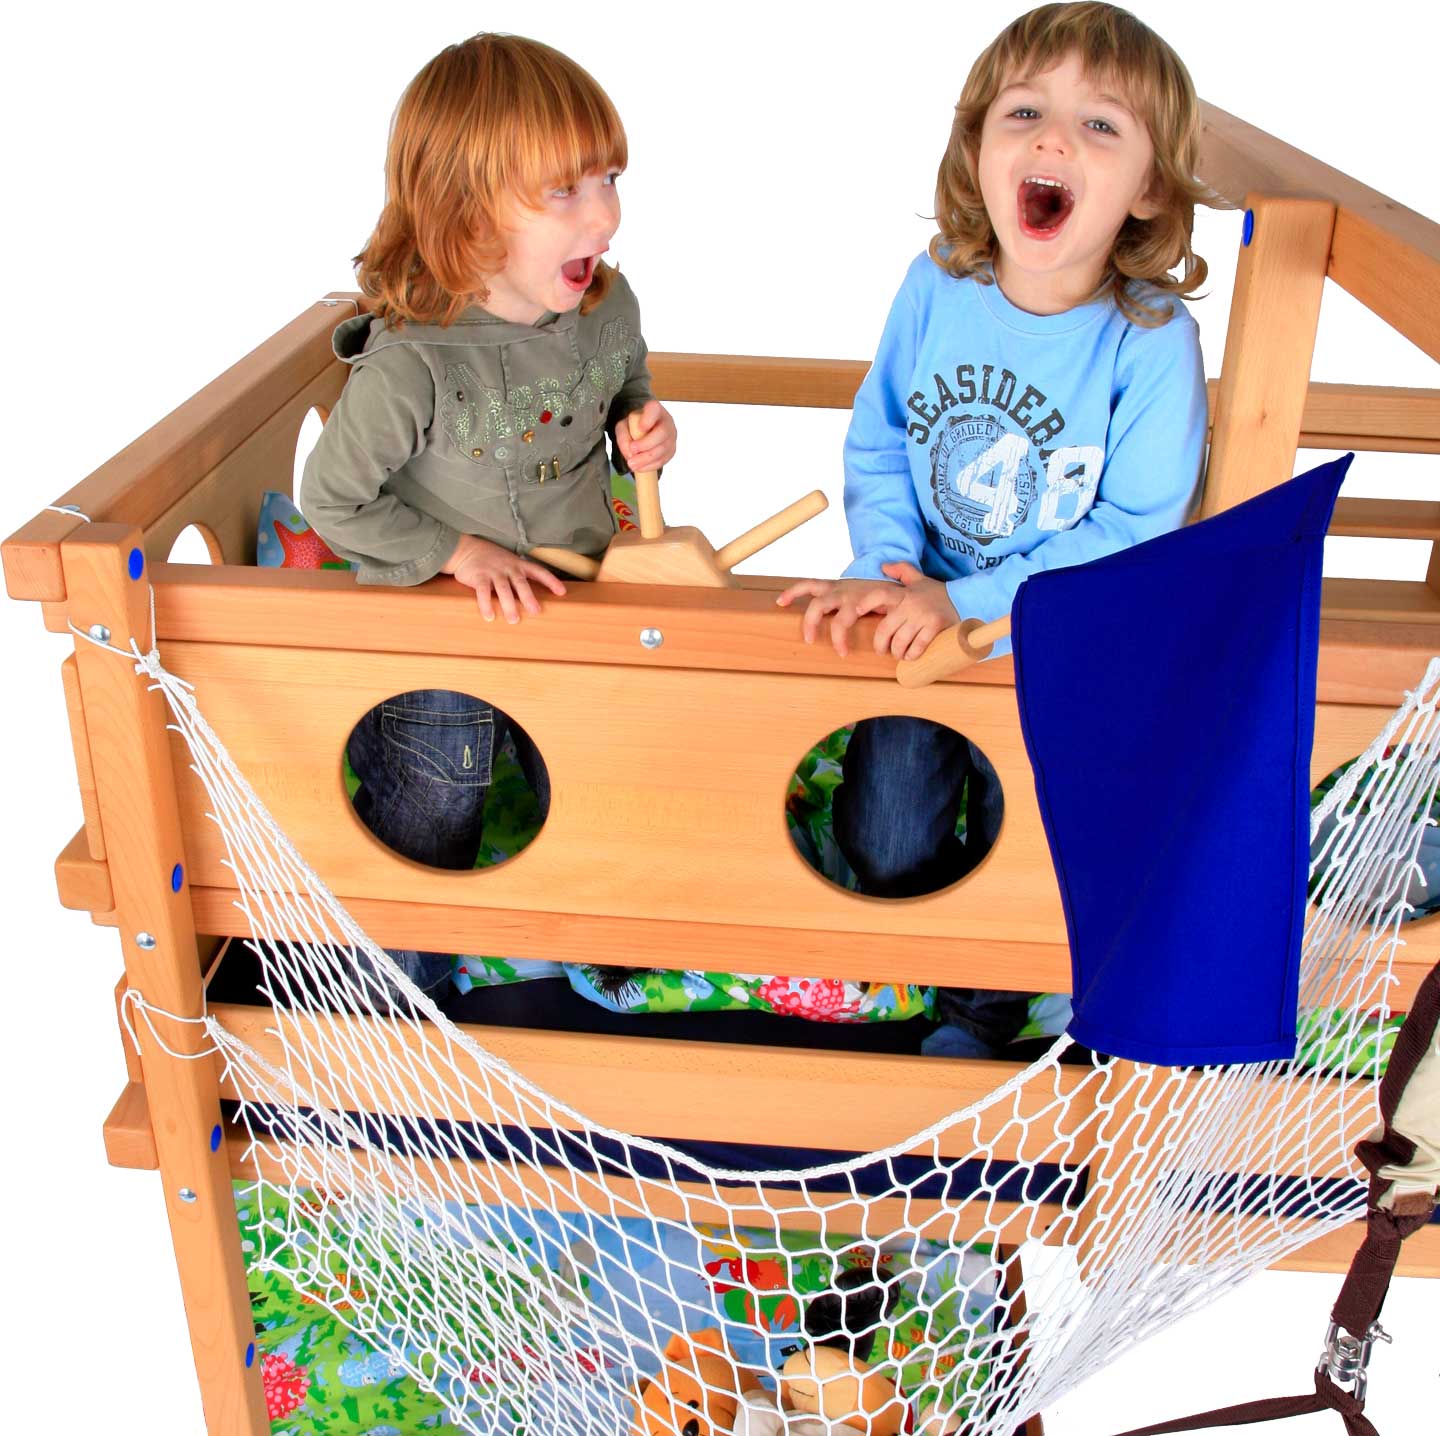 Kids’ beds set to wow